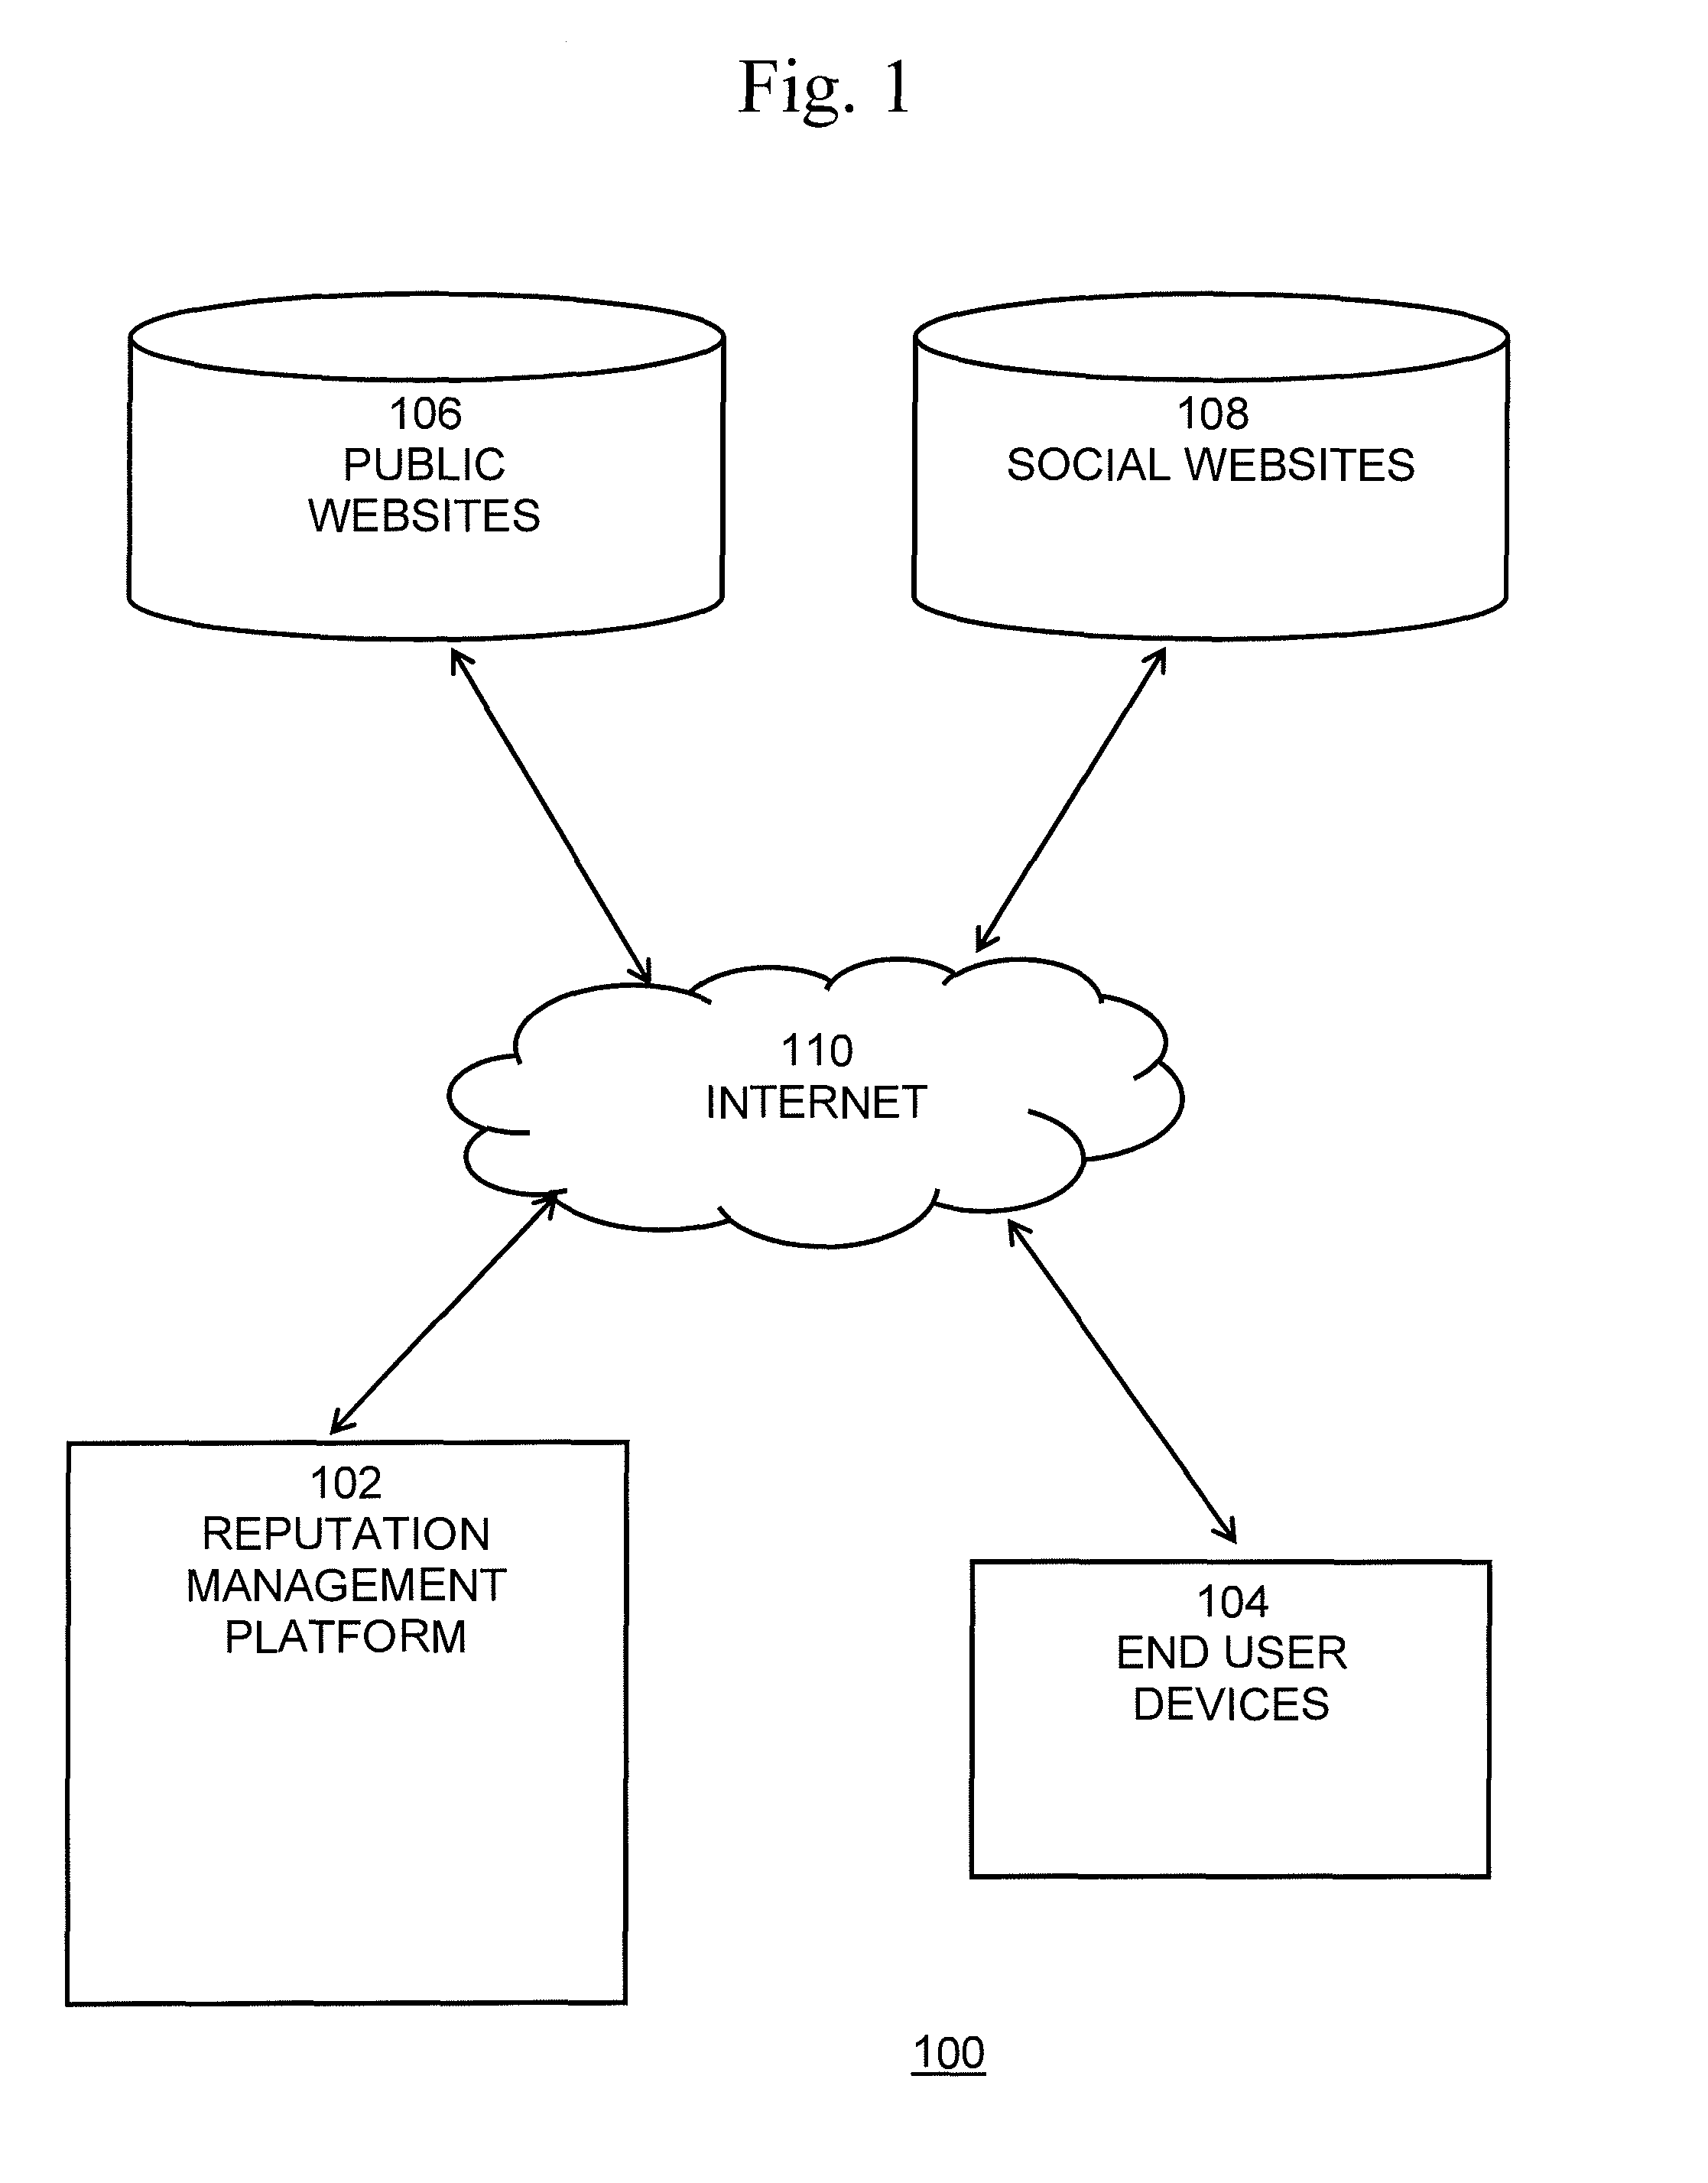 Method, System, And Computer Program Product For Monitoring Online Reputations With The Capability Of Creating New Content